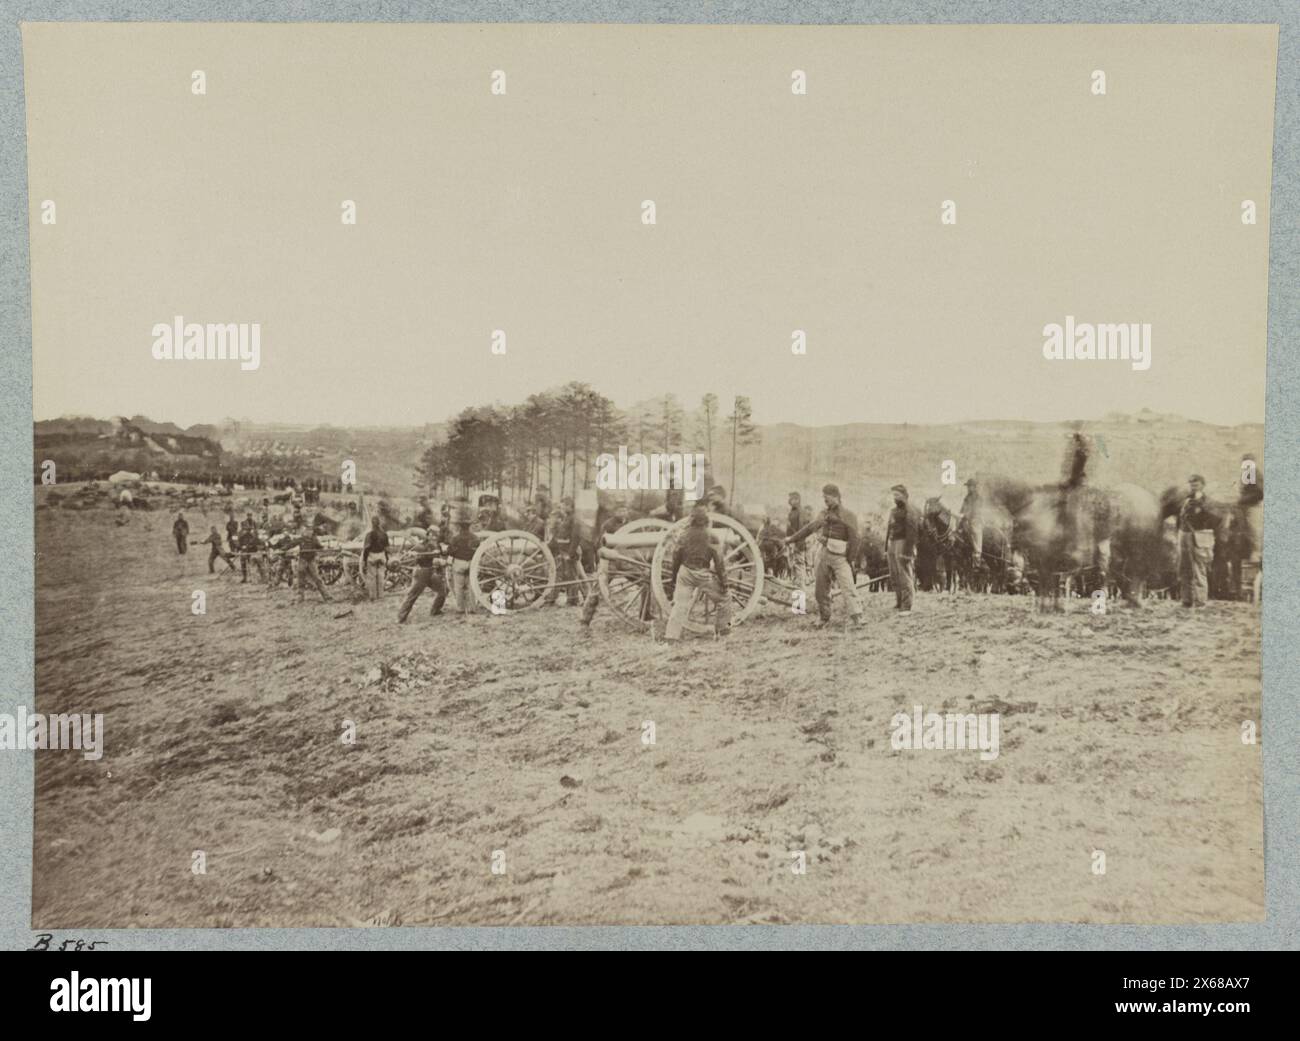 Artillery going into action on south bank of Rappahannock, May 2, 1863, Civil War Photographs 1861-1865 Stock Photo